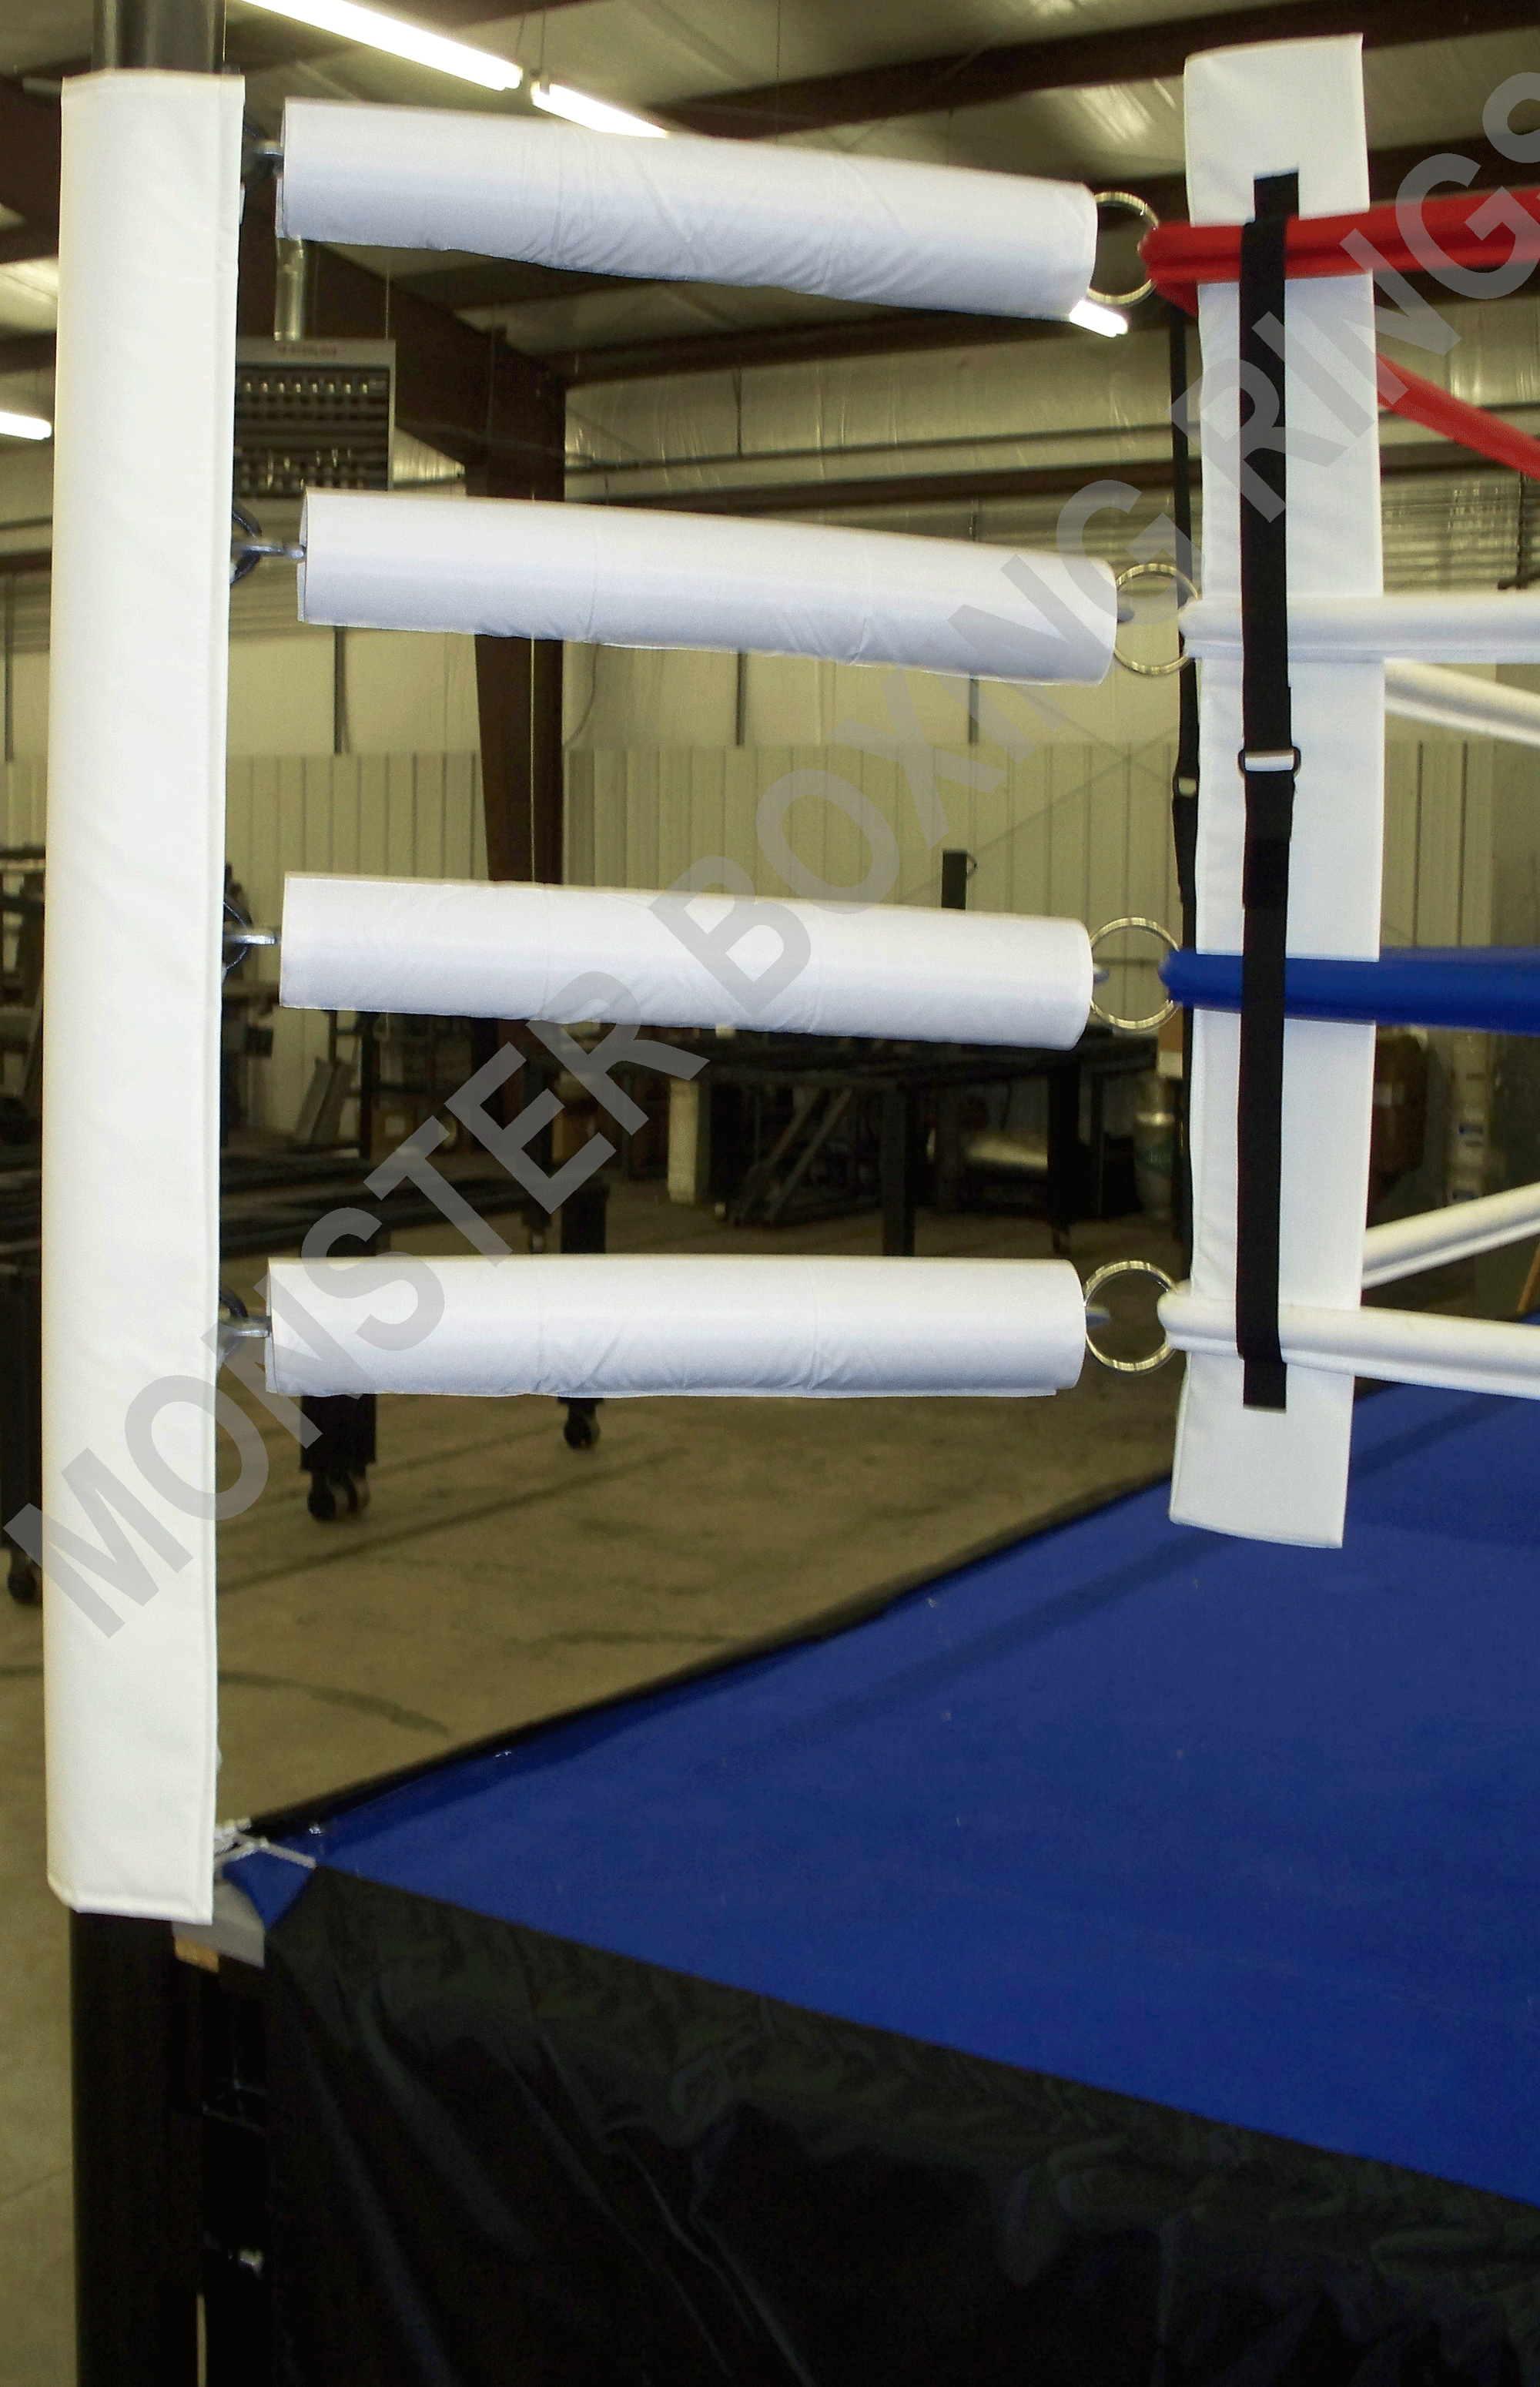 Monster Rings and cages sell turnbuckle covers for your Boxing Ring